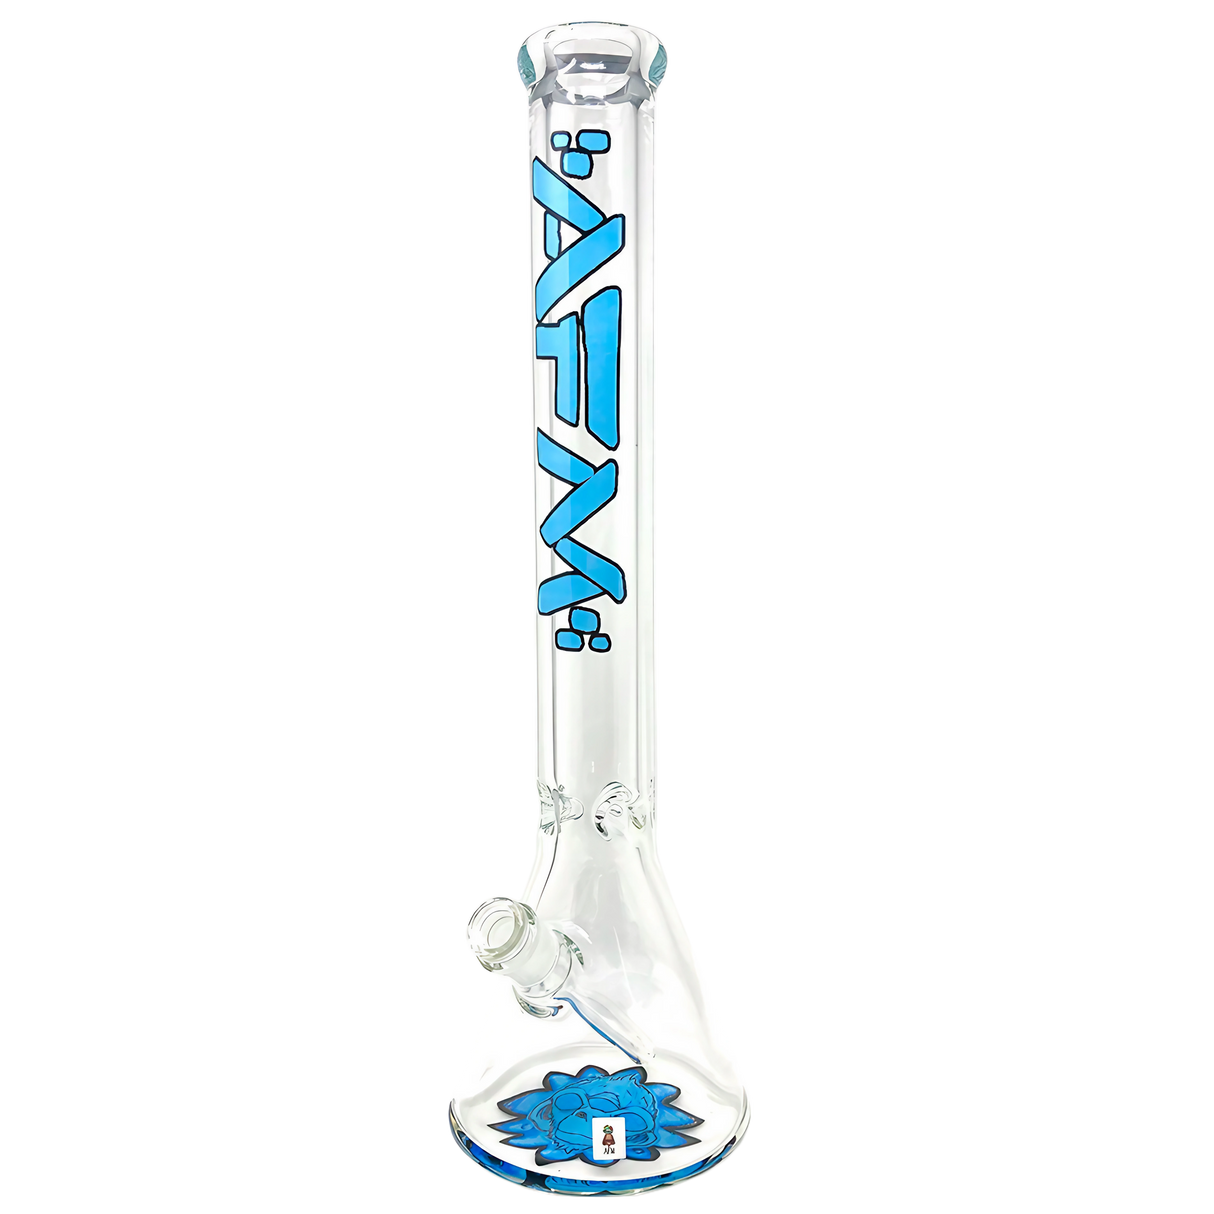 AFM The Flower Monkey 9mm Clear Beaker Bong 18" Front View with Blue Accents